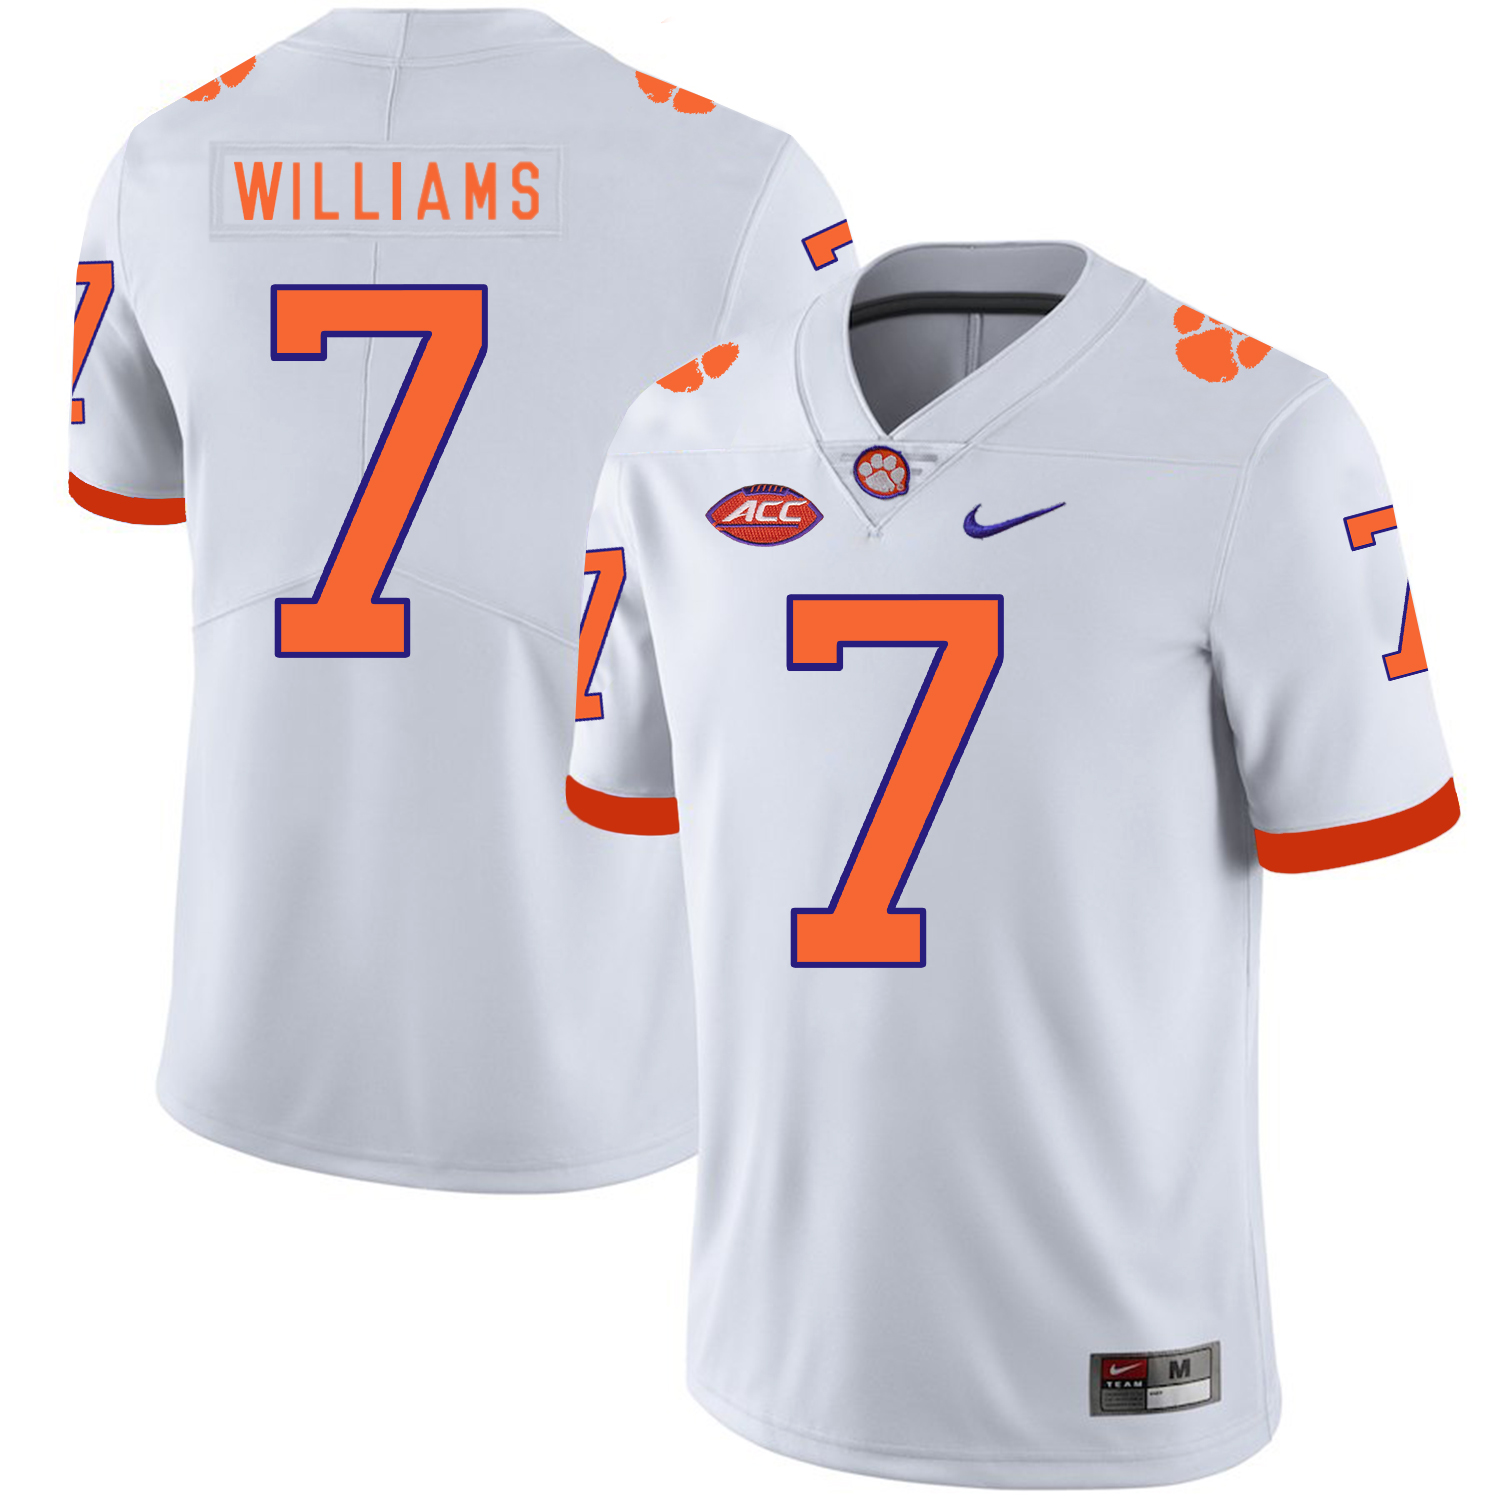 Clemson Tigers 7 Mike Williams White Nike College Football Jersey